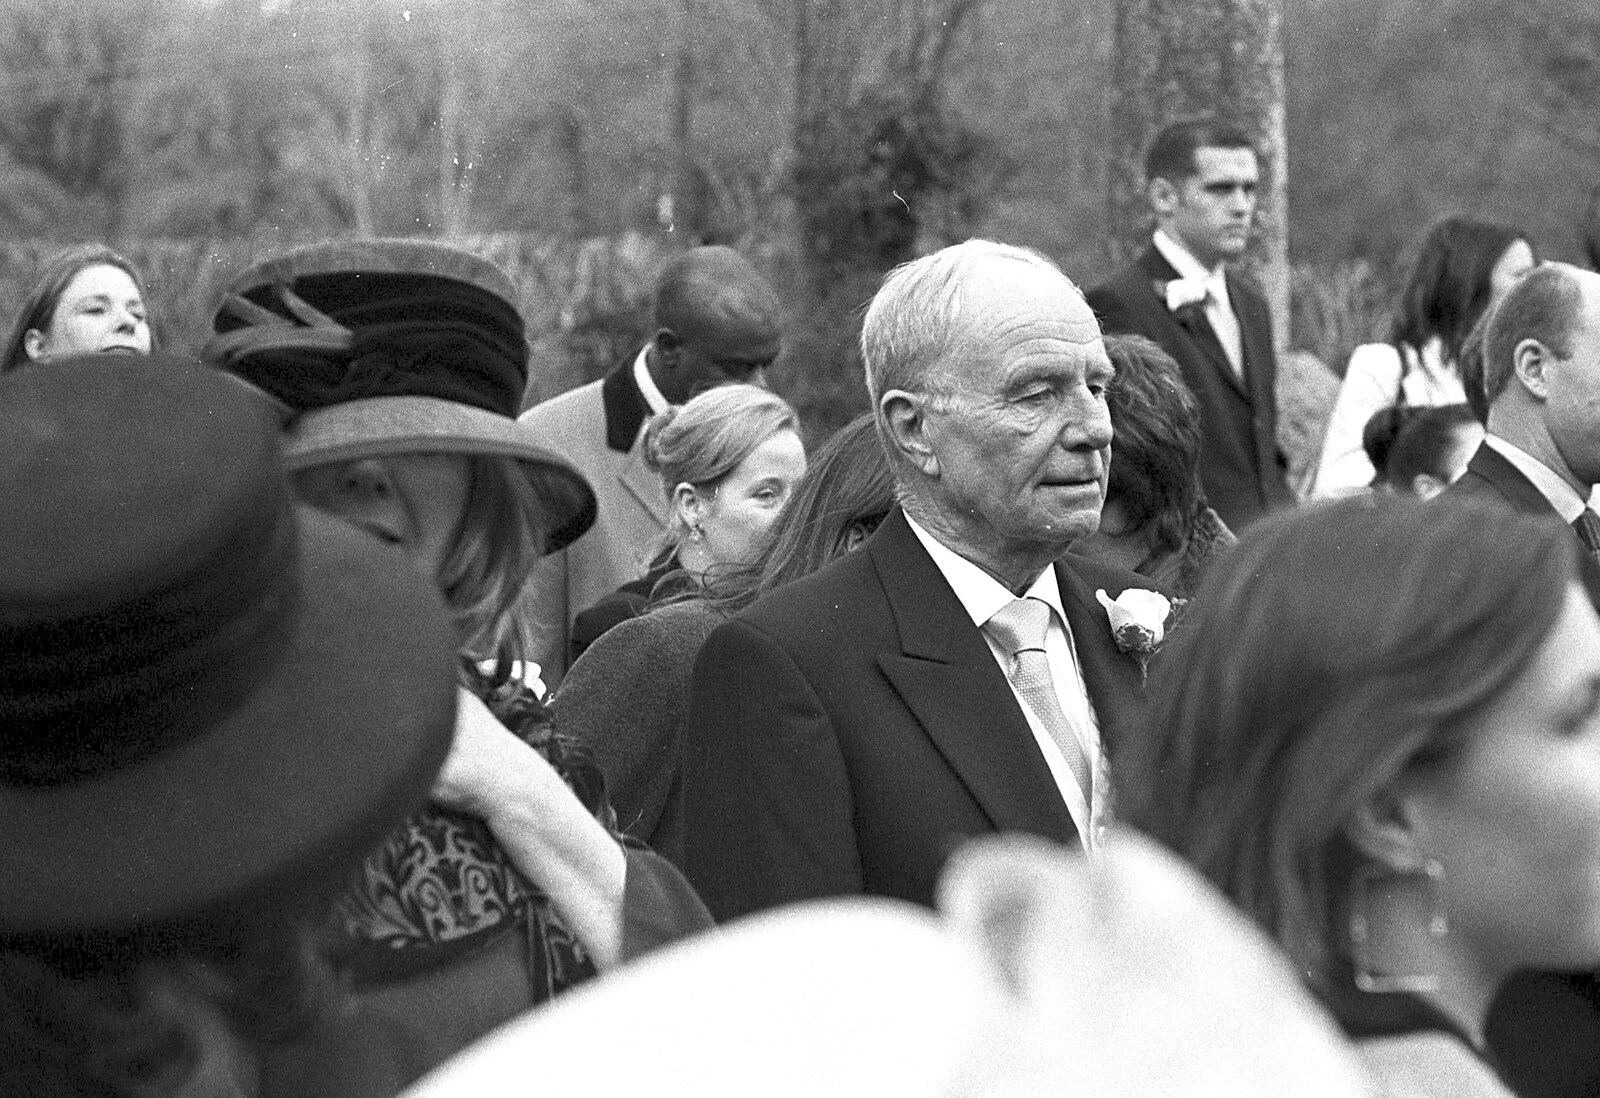 The Old Chap from Sis's Nearly-Christmas Wedding, Meavy, Dartmoor - 20th December 2003